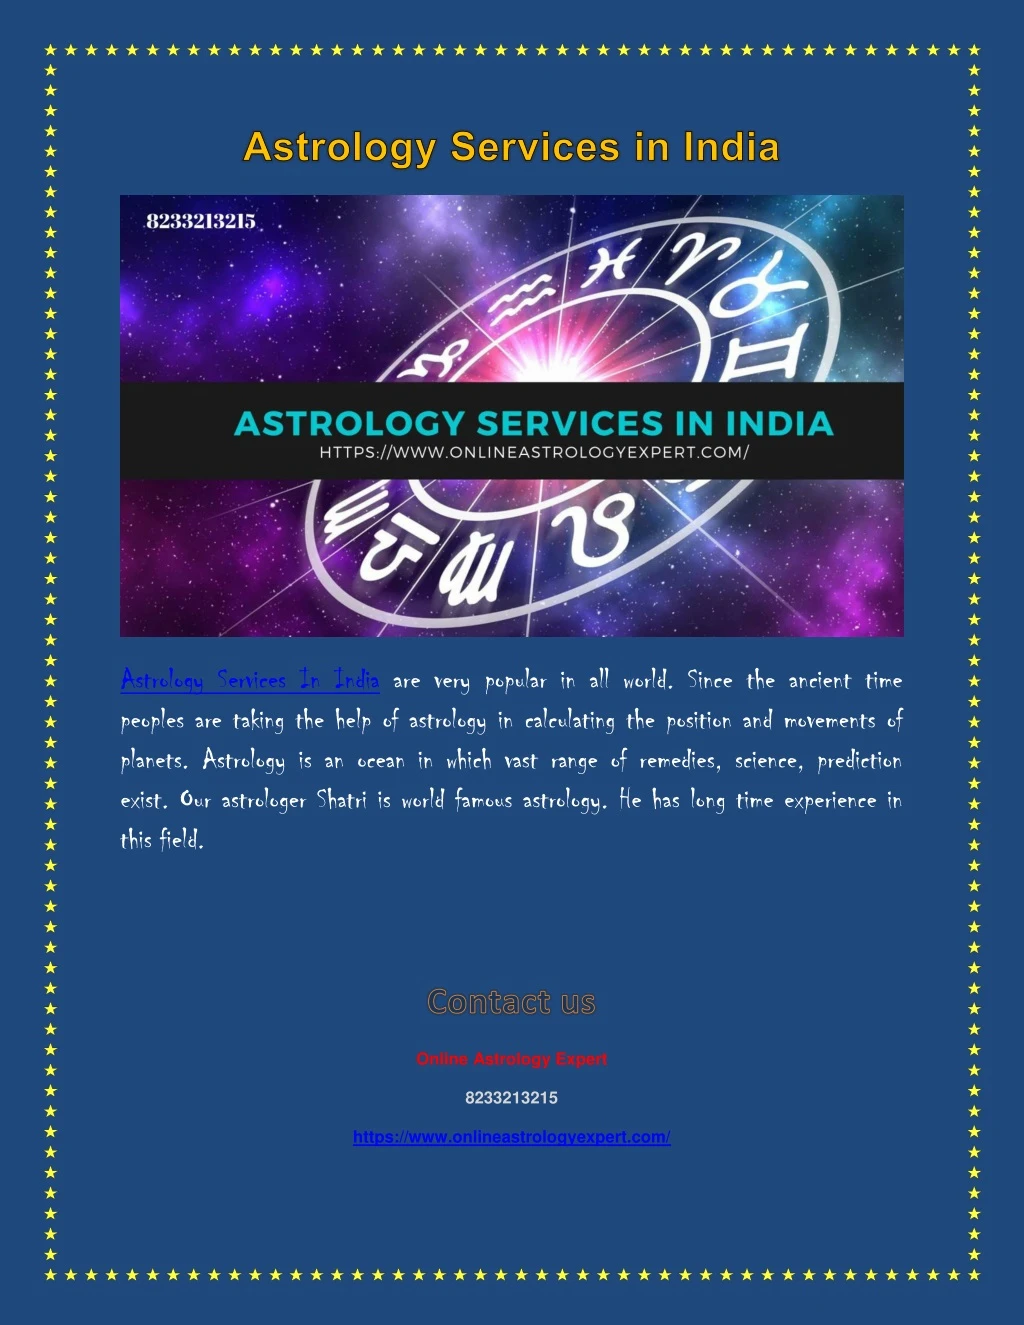 astrology services in india are very popular